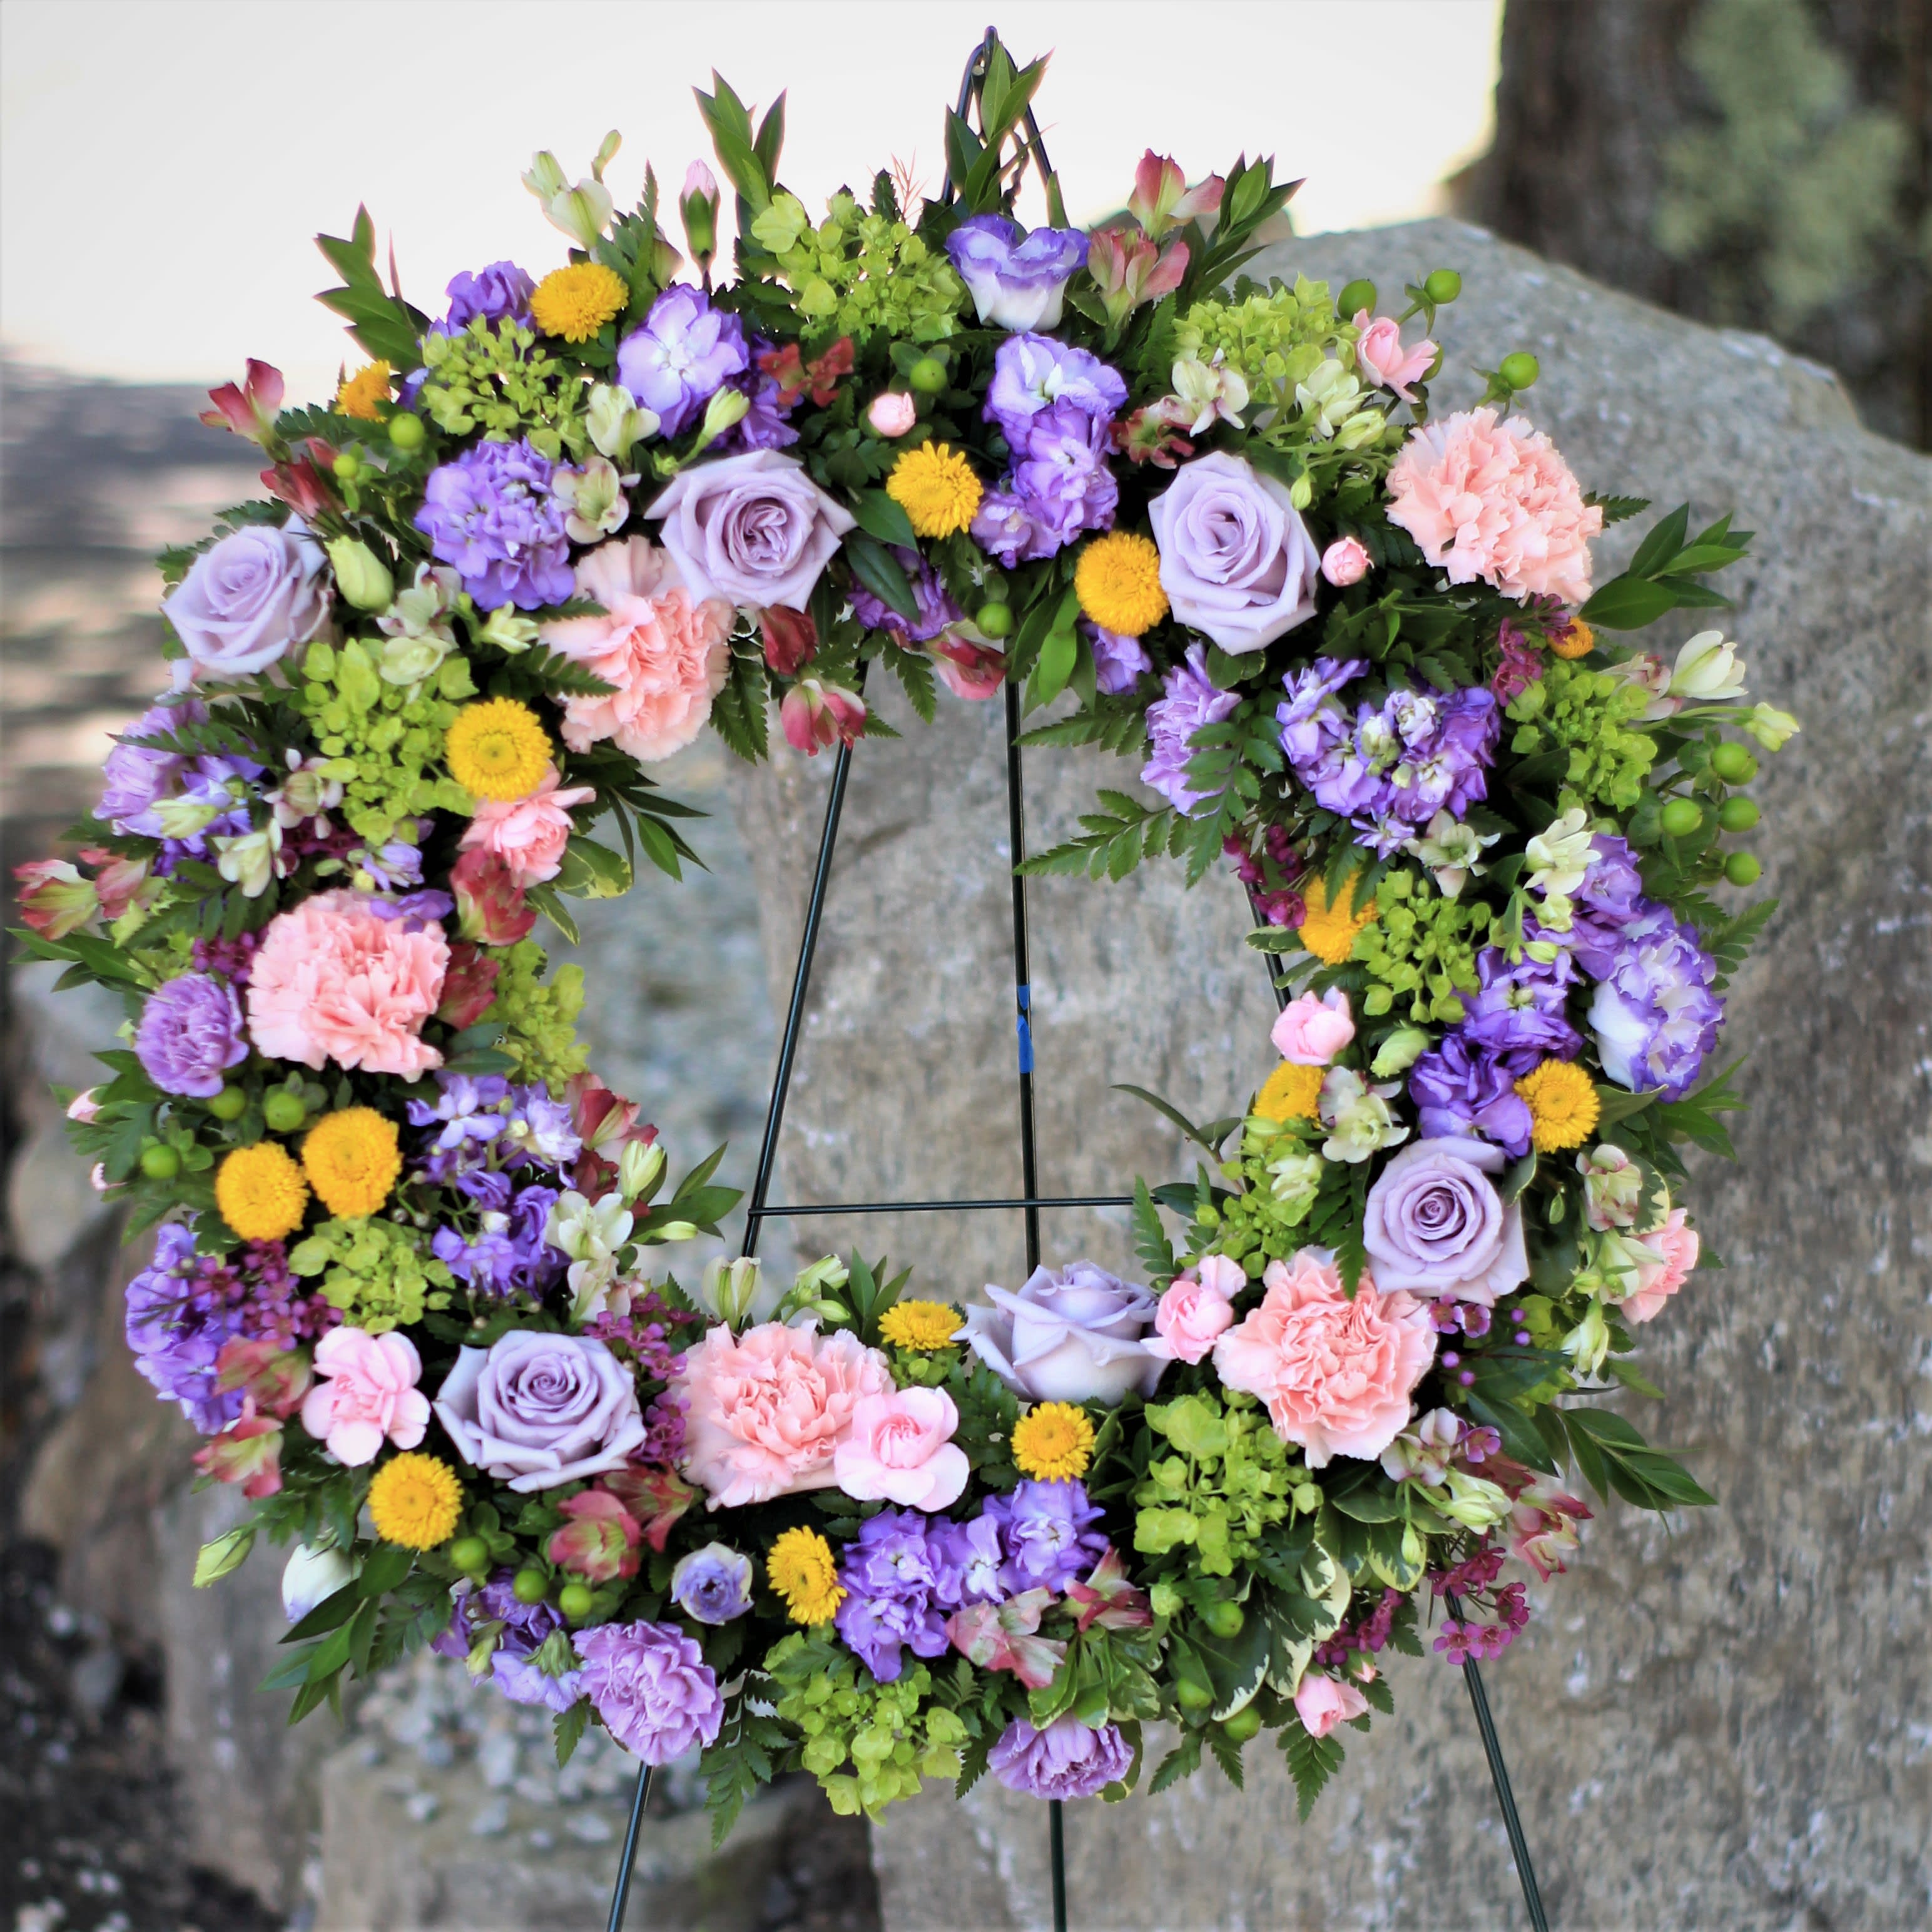 Heaven Sent in Watercolors  - An unforgettable tribute to send off your loved one. Vivid water colors show off memories of time spent with roses, carnations, mums, and other seasonal garden flowers in shades of lavender, light pink, yellow, and lime greens. Also available in open heart shape.